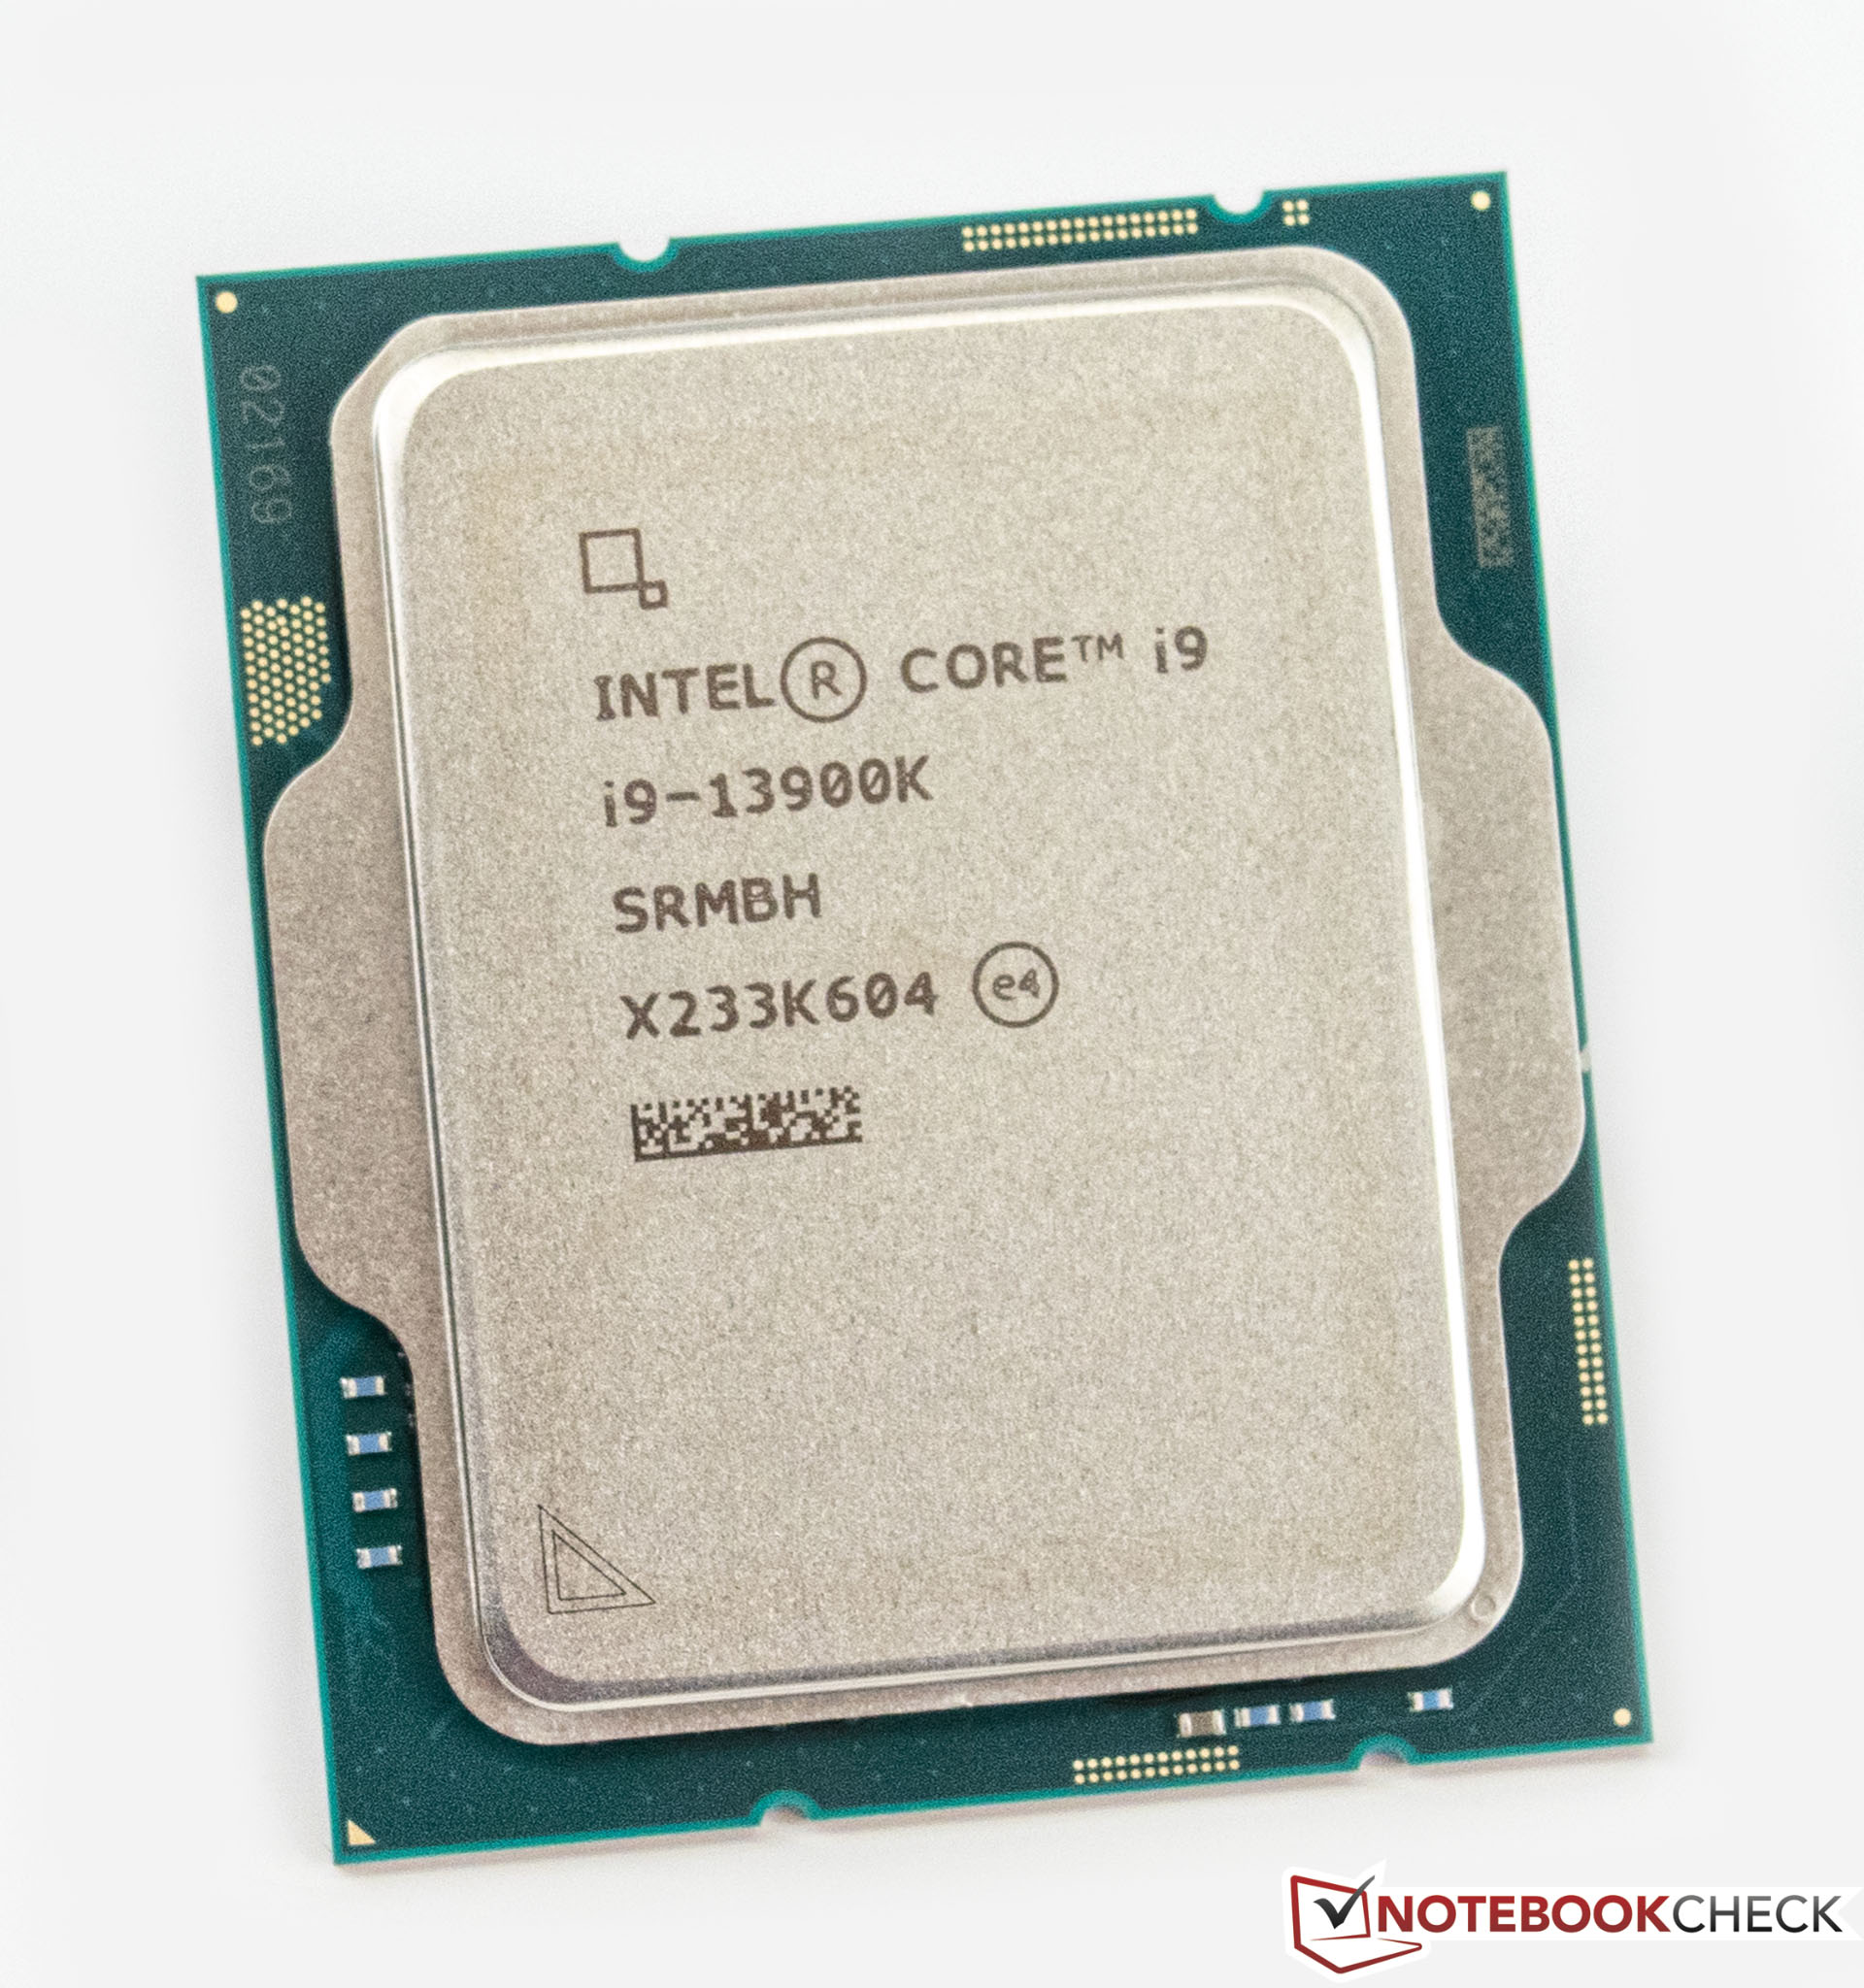 Intel Core i9-10980XE Desktop CPU - Benchmarks and Specs